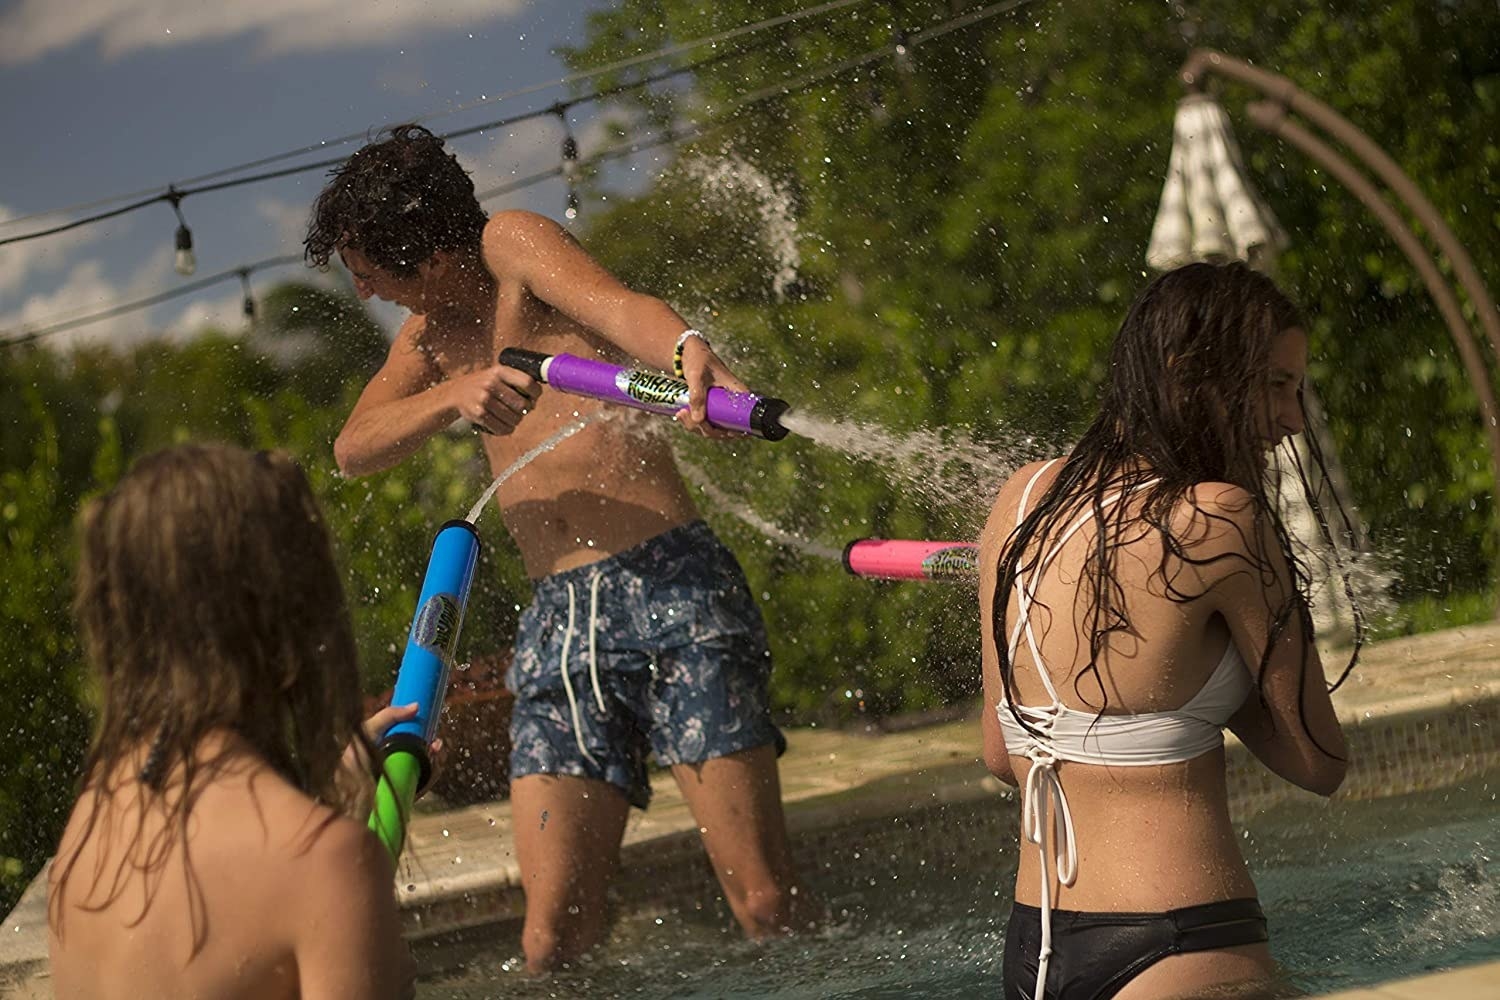 Three teenagers in a pool spraying each other with the water guns